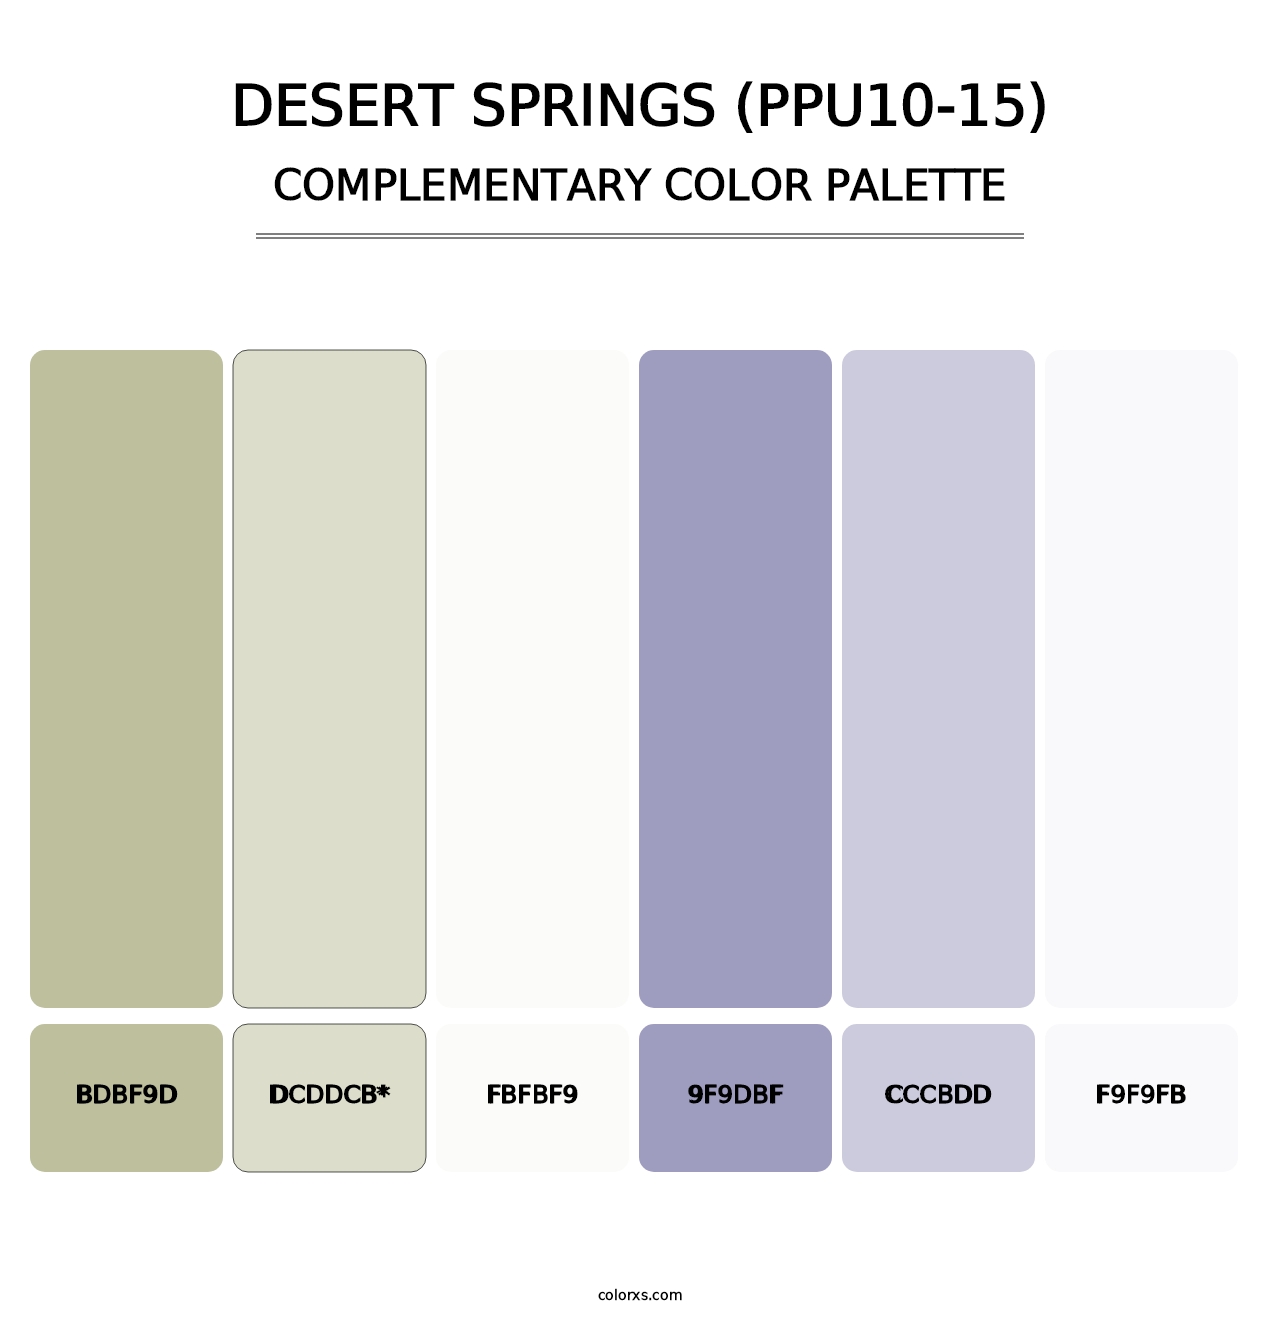 Desert Springs (PPU10-15) - Complementary Color Palette